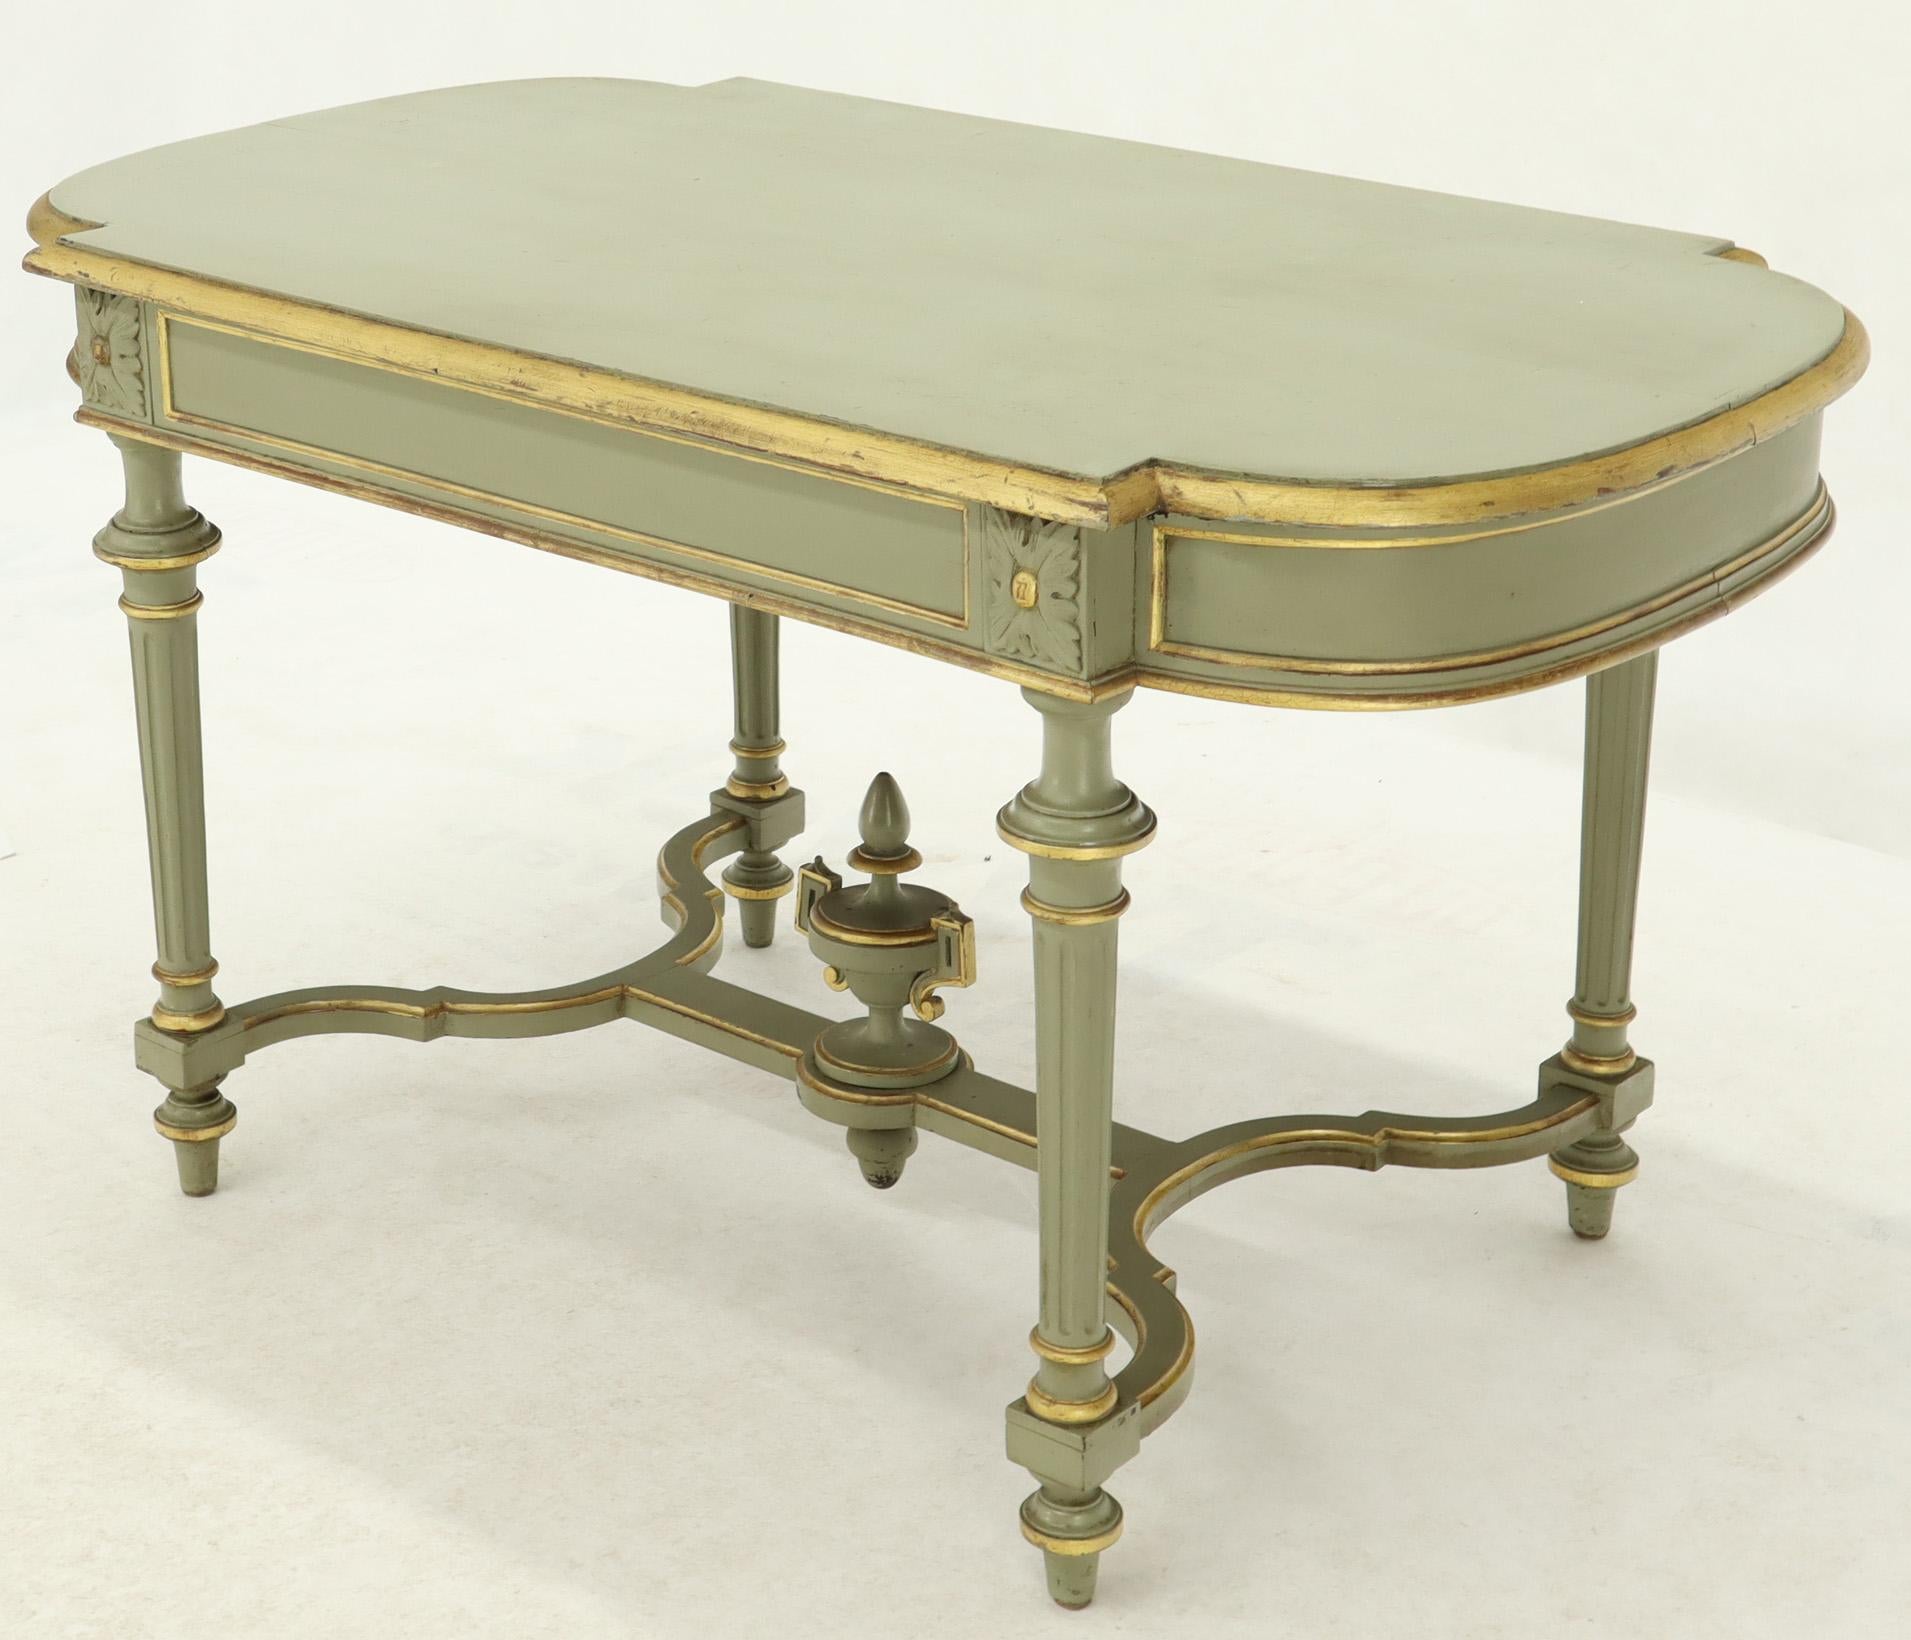 Shabby Chic and Gold Leaf Distressed Antique Writing Table Desk Large Console For Sale 5